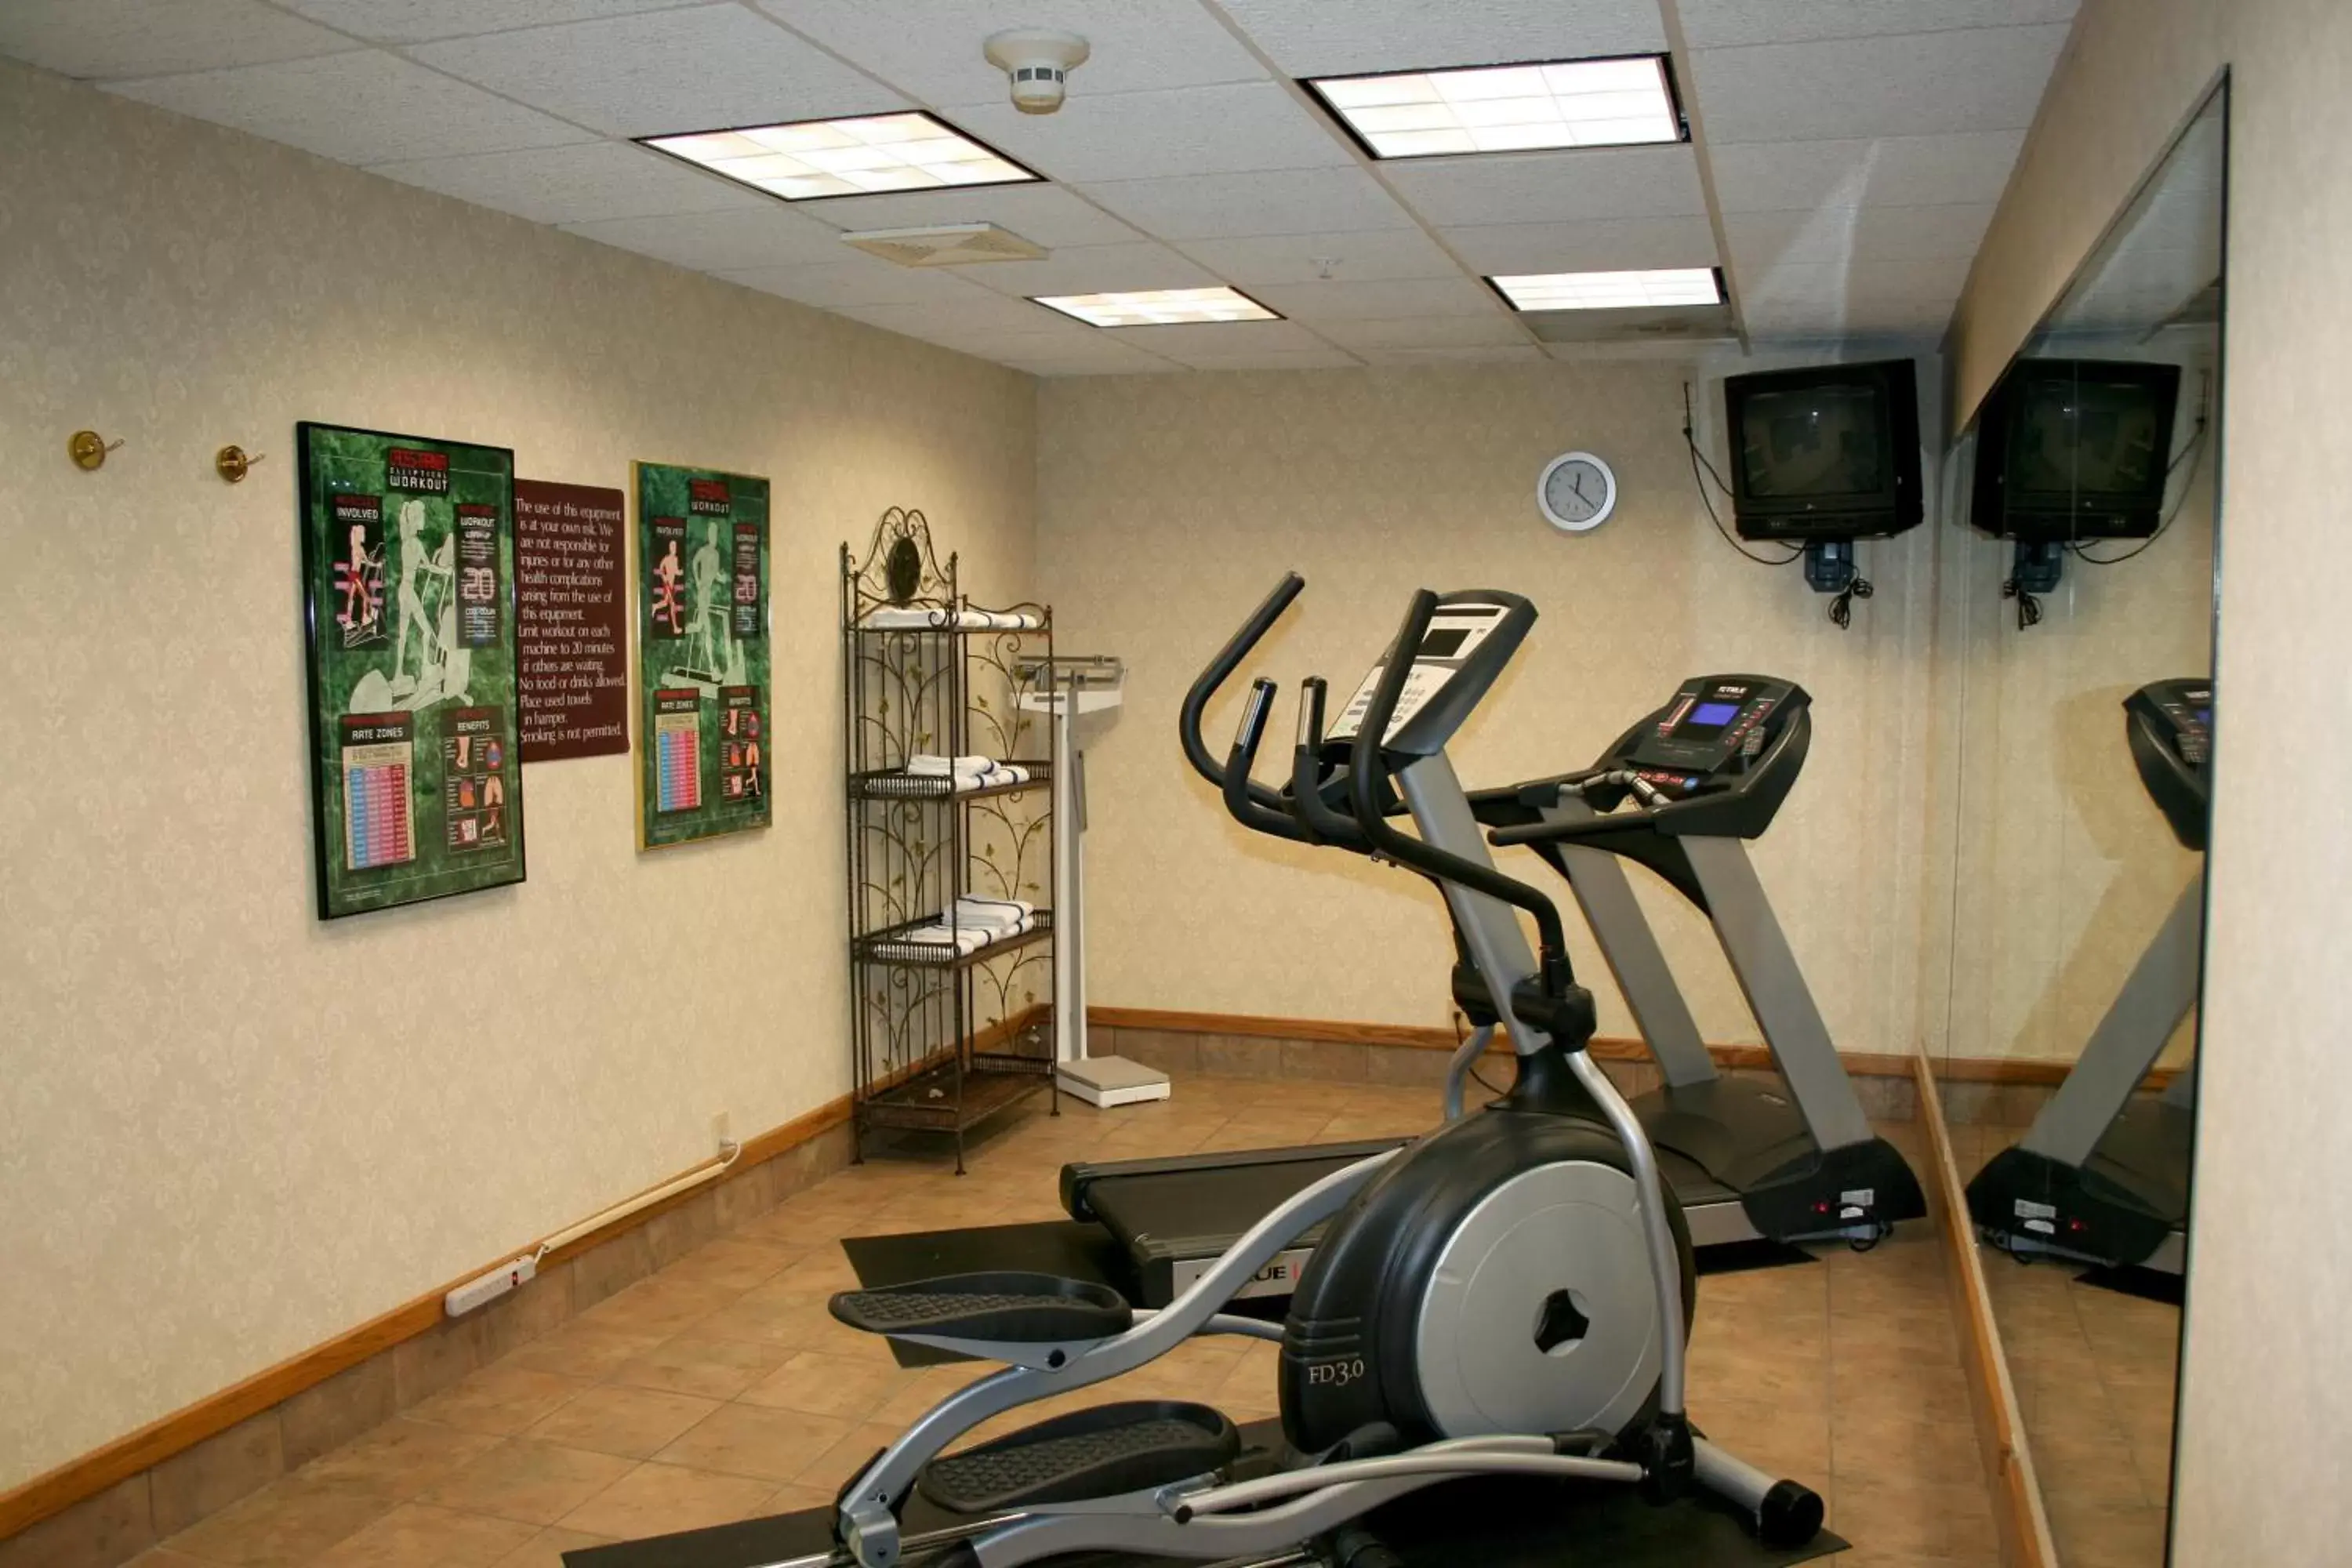 Fitness centre/facilities, Fitness Center/Facilities in Baymont by Wyndham Portage